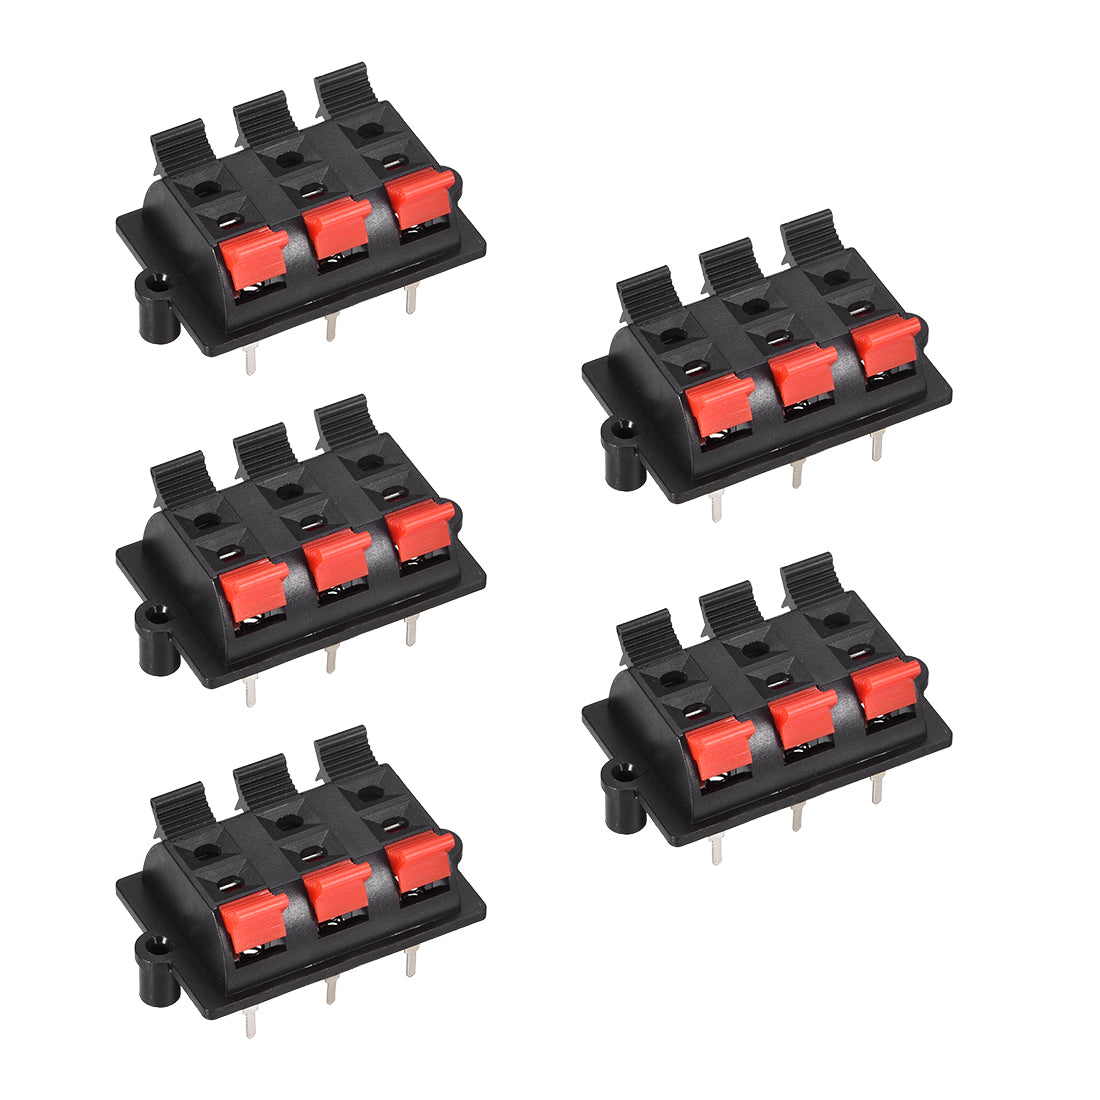 Uxcell Uxcell 2 Row 8 Way Spring Speaker Terminal Clip Push Release Connector Audio Cable Terminals Strip Block WP8-03 5Pcs